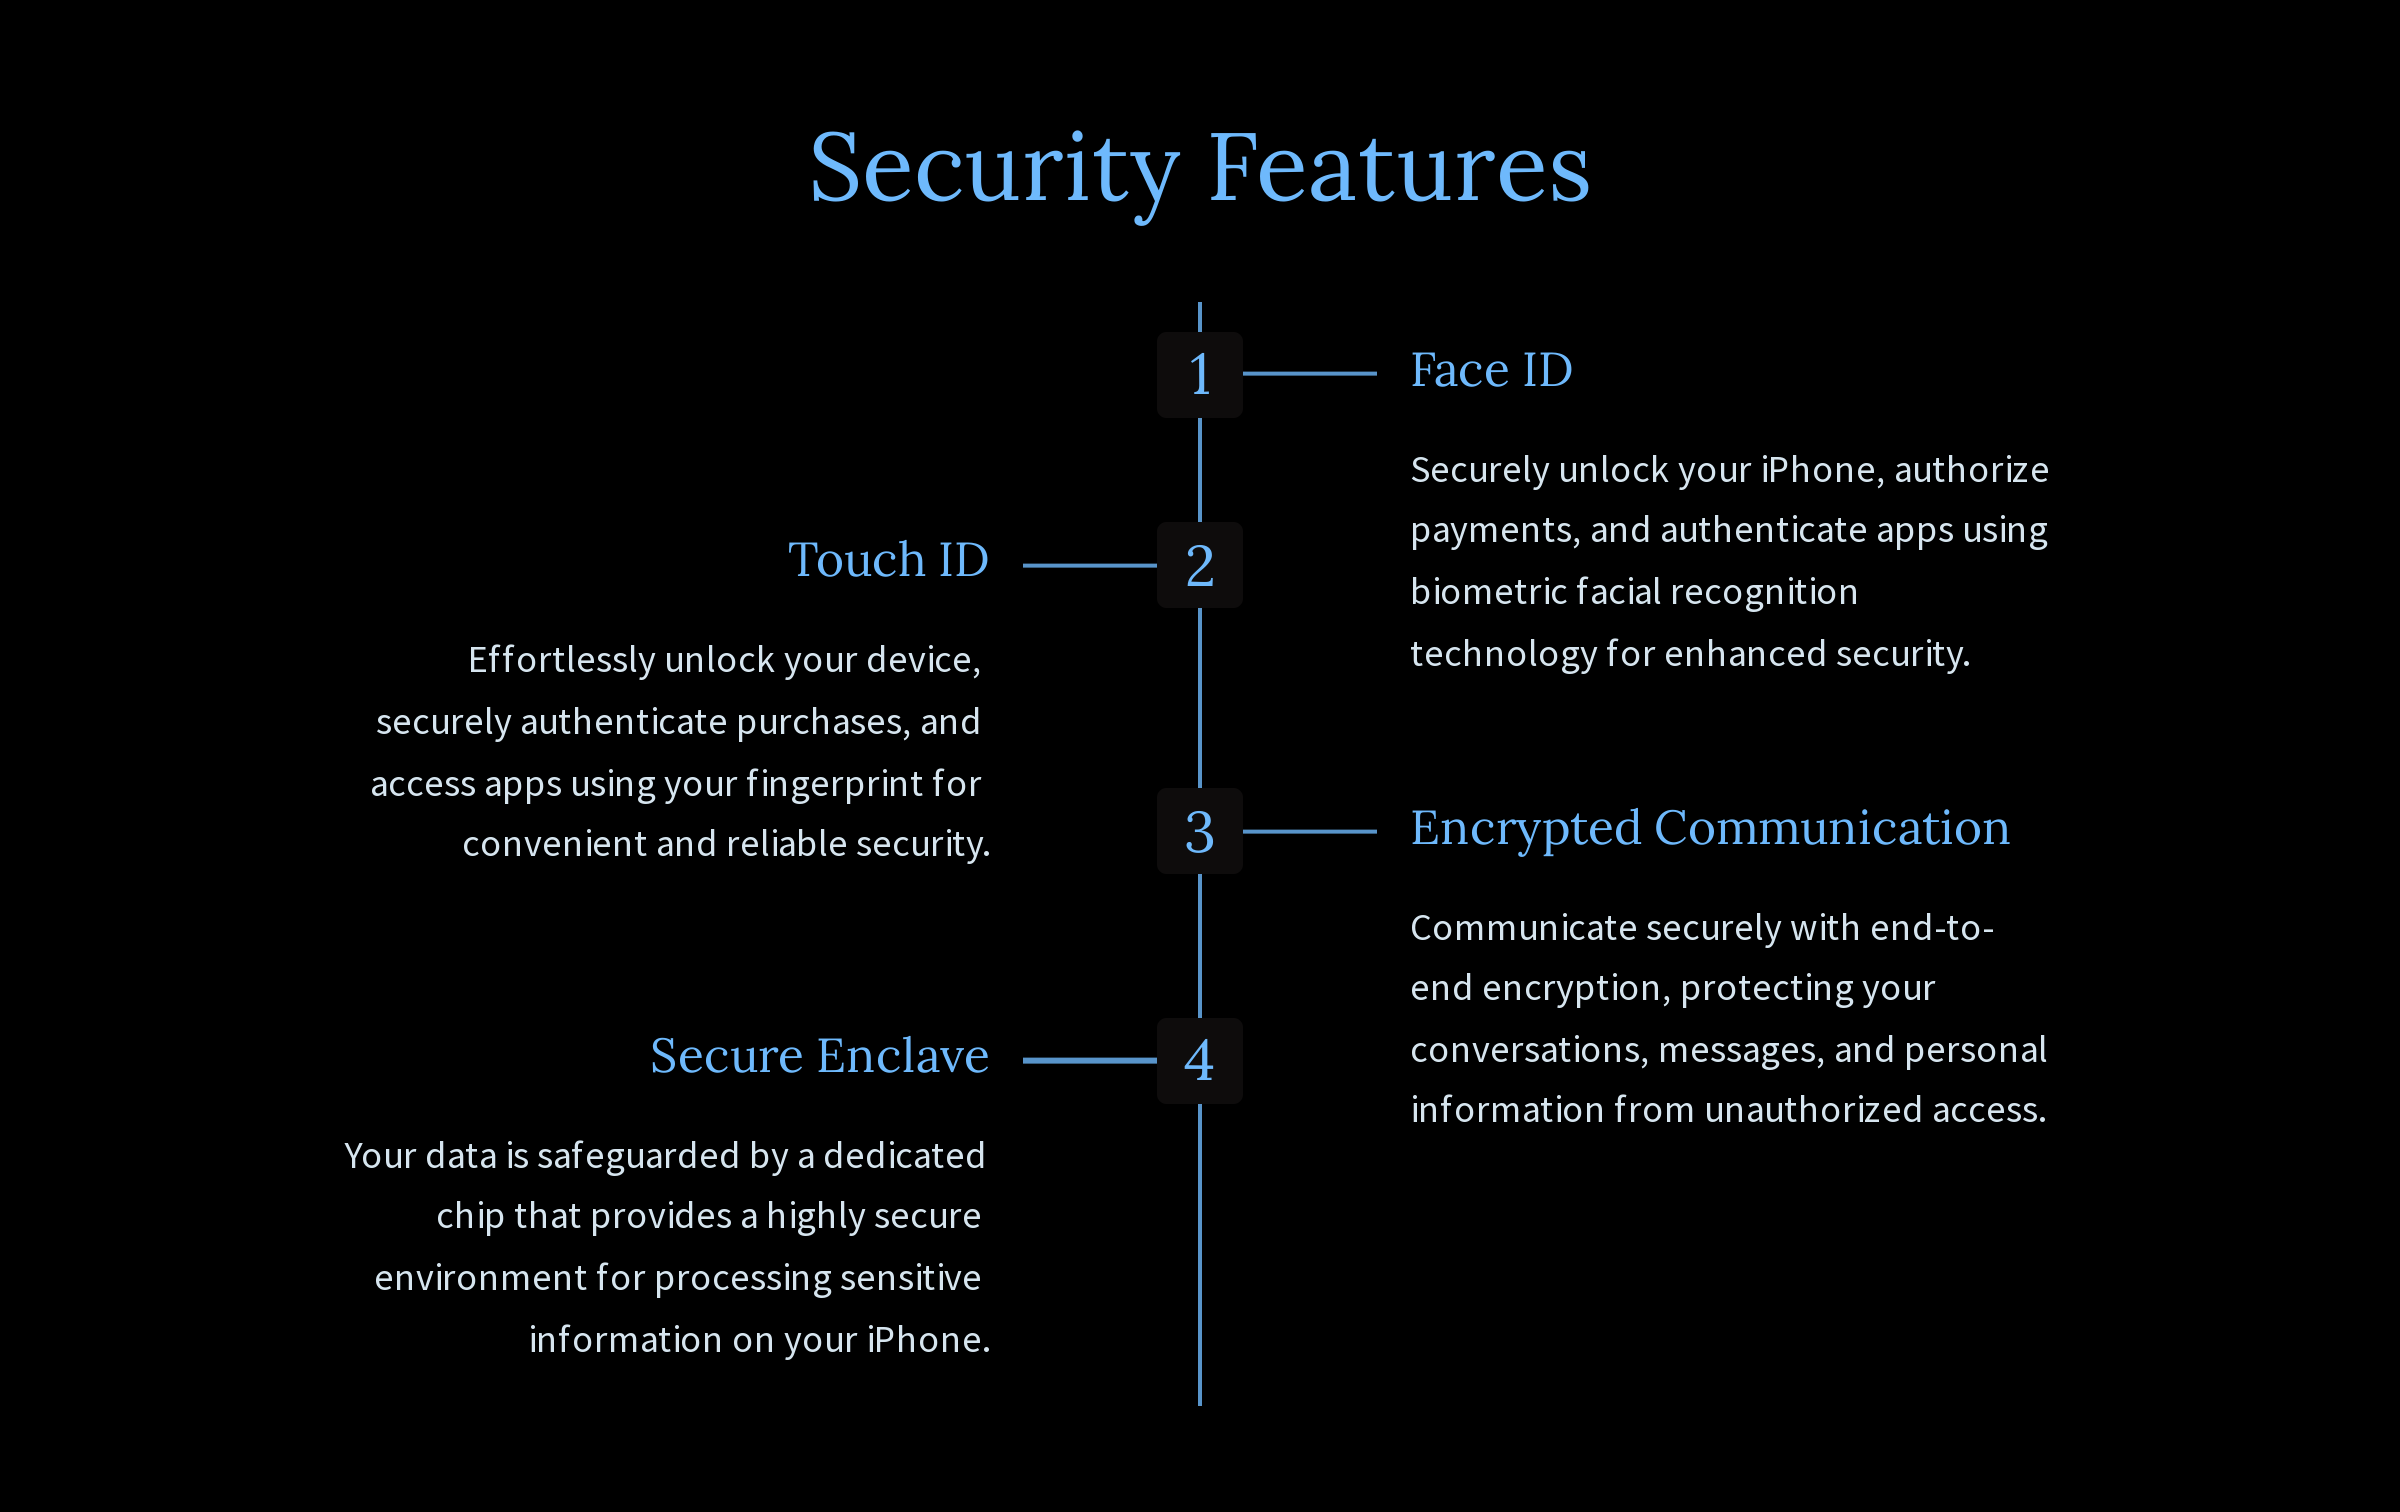 Security features